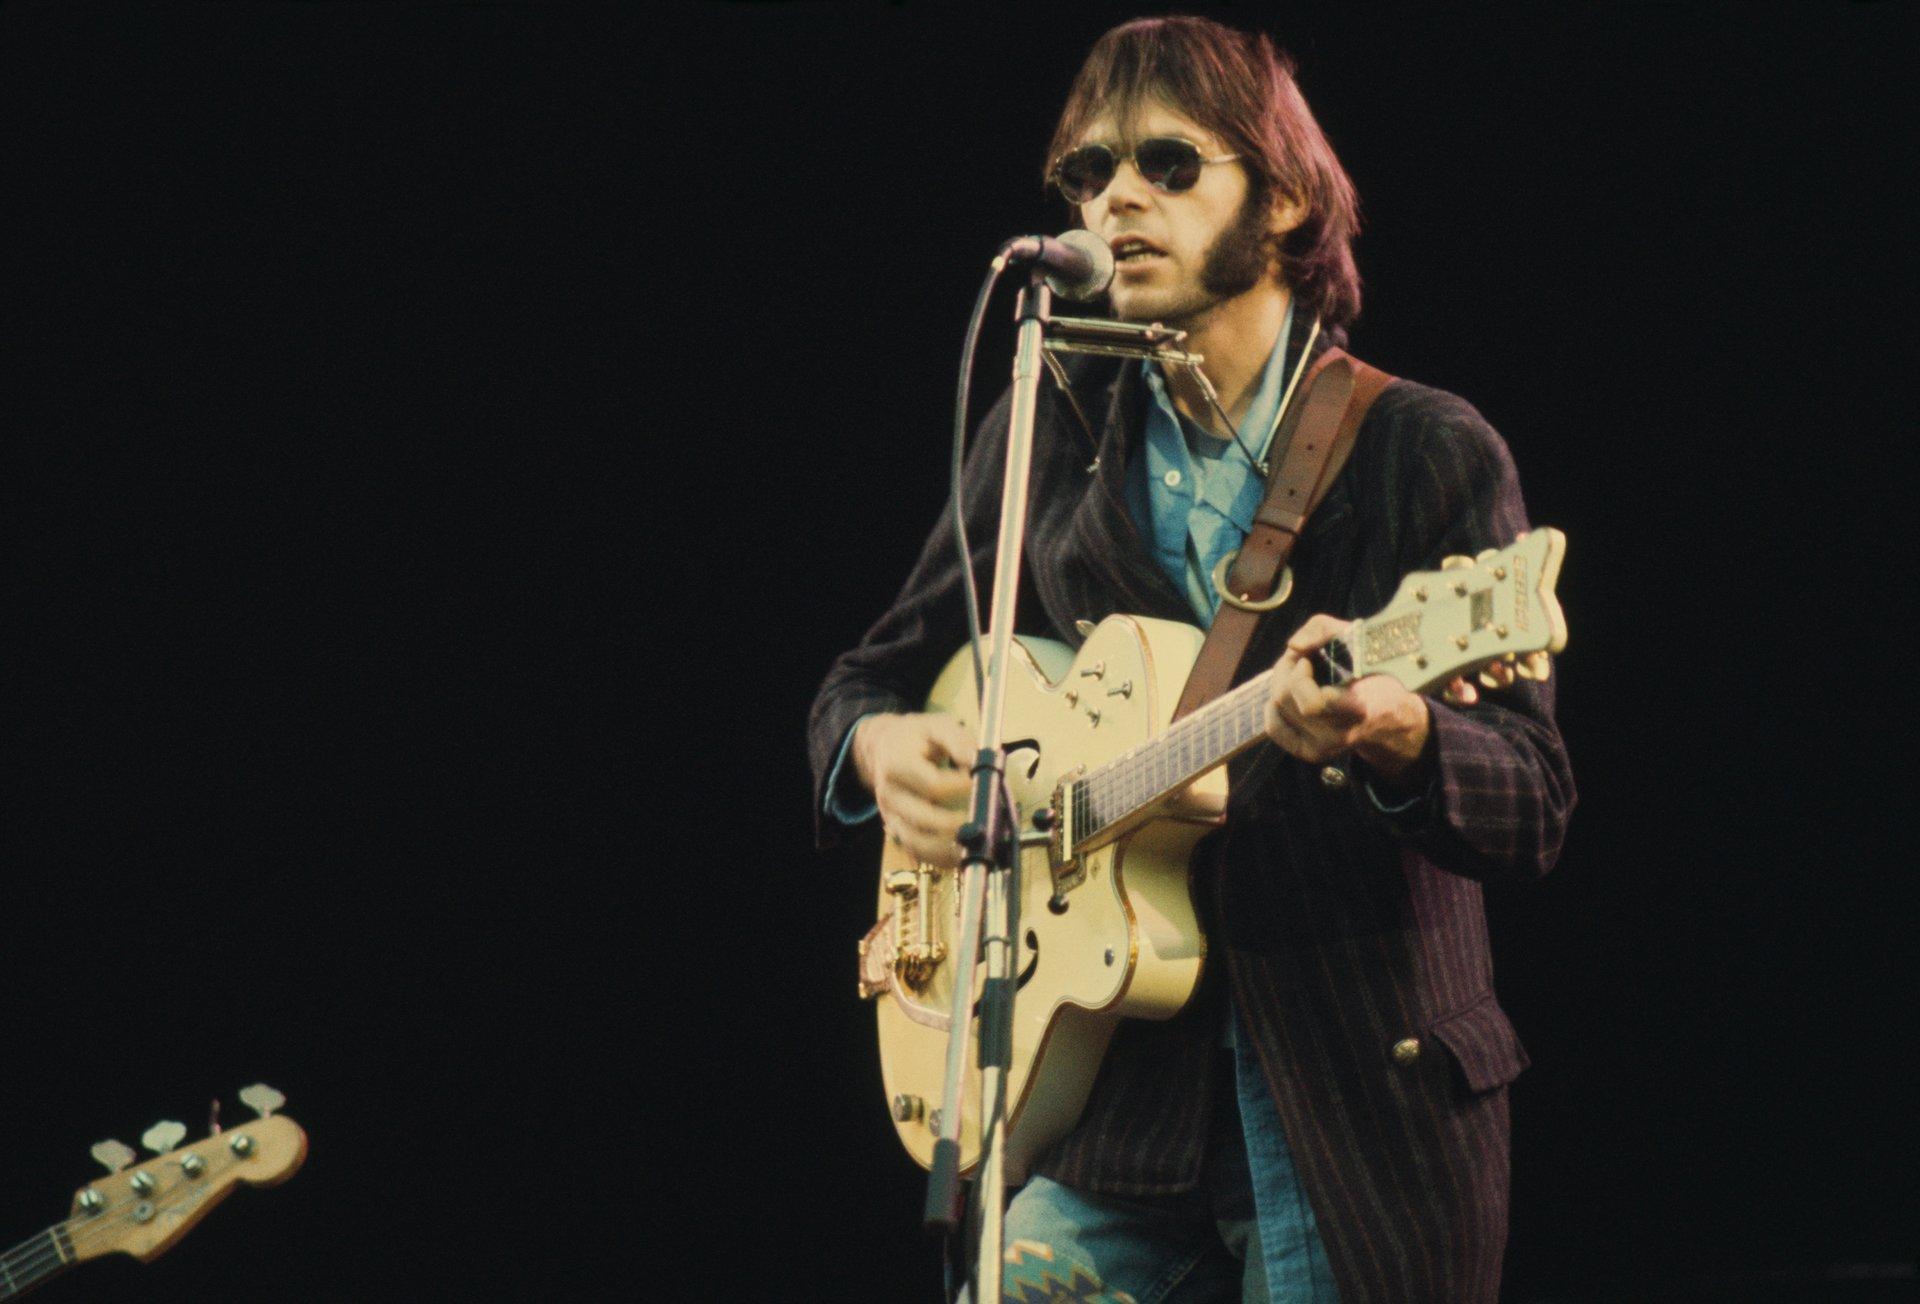 Neil Young's episode of For The Record for 'Harevest'